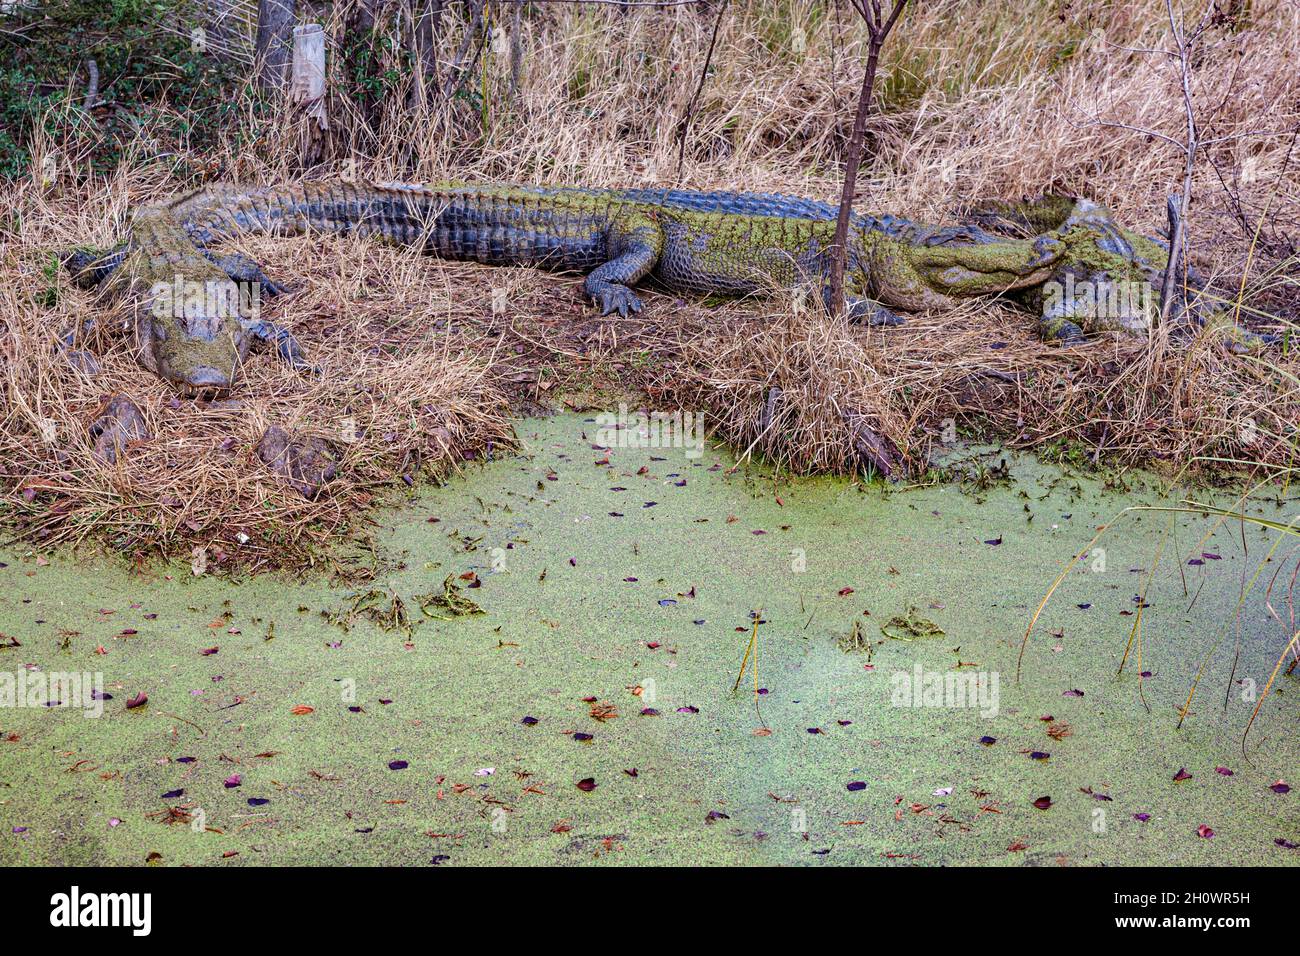 Three alligators (Alligator mississippiensis) in a boggy marsh near Pascagoula, Mississippi Stock Photo